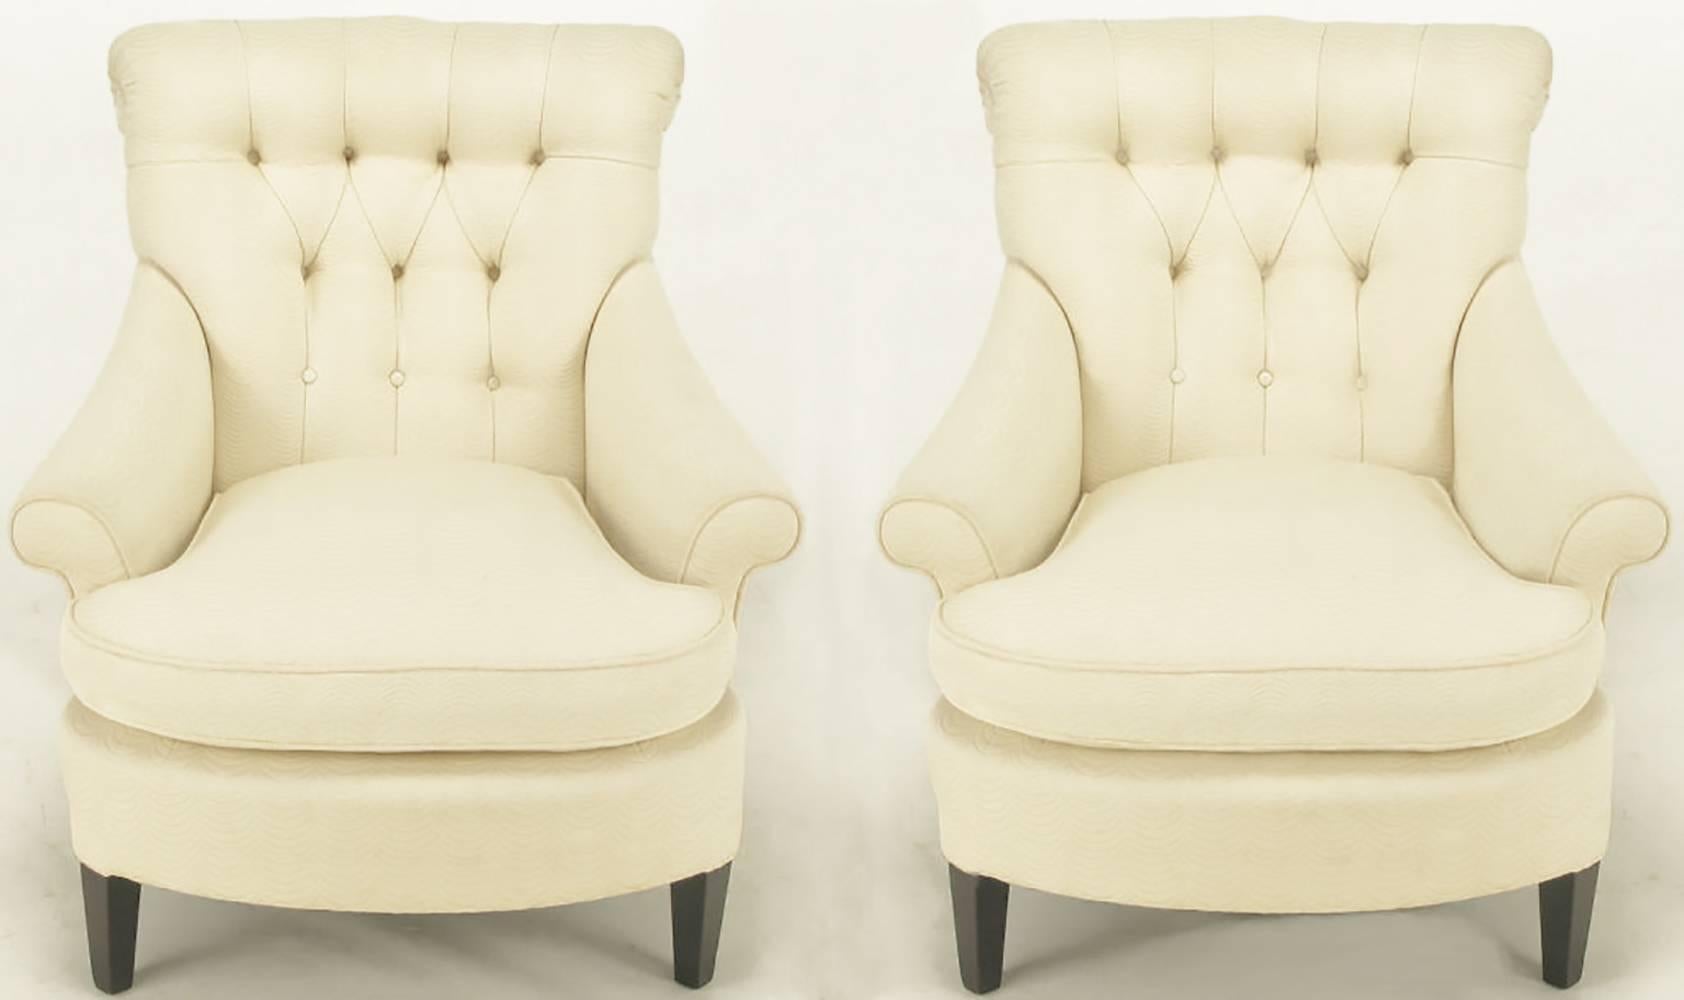 Pair of ivory cotton/silk blend upholstered button tufted lounge chairs with rolled arms with rolled large button detailed backs. Loose down filled seat cushions, canted walnut front legs with raked back legs and curved front. Upholstery is woven